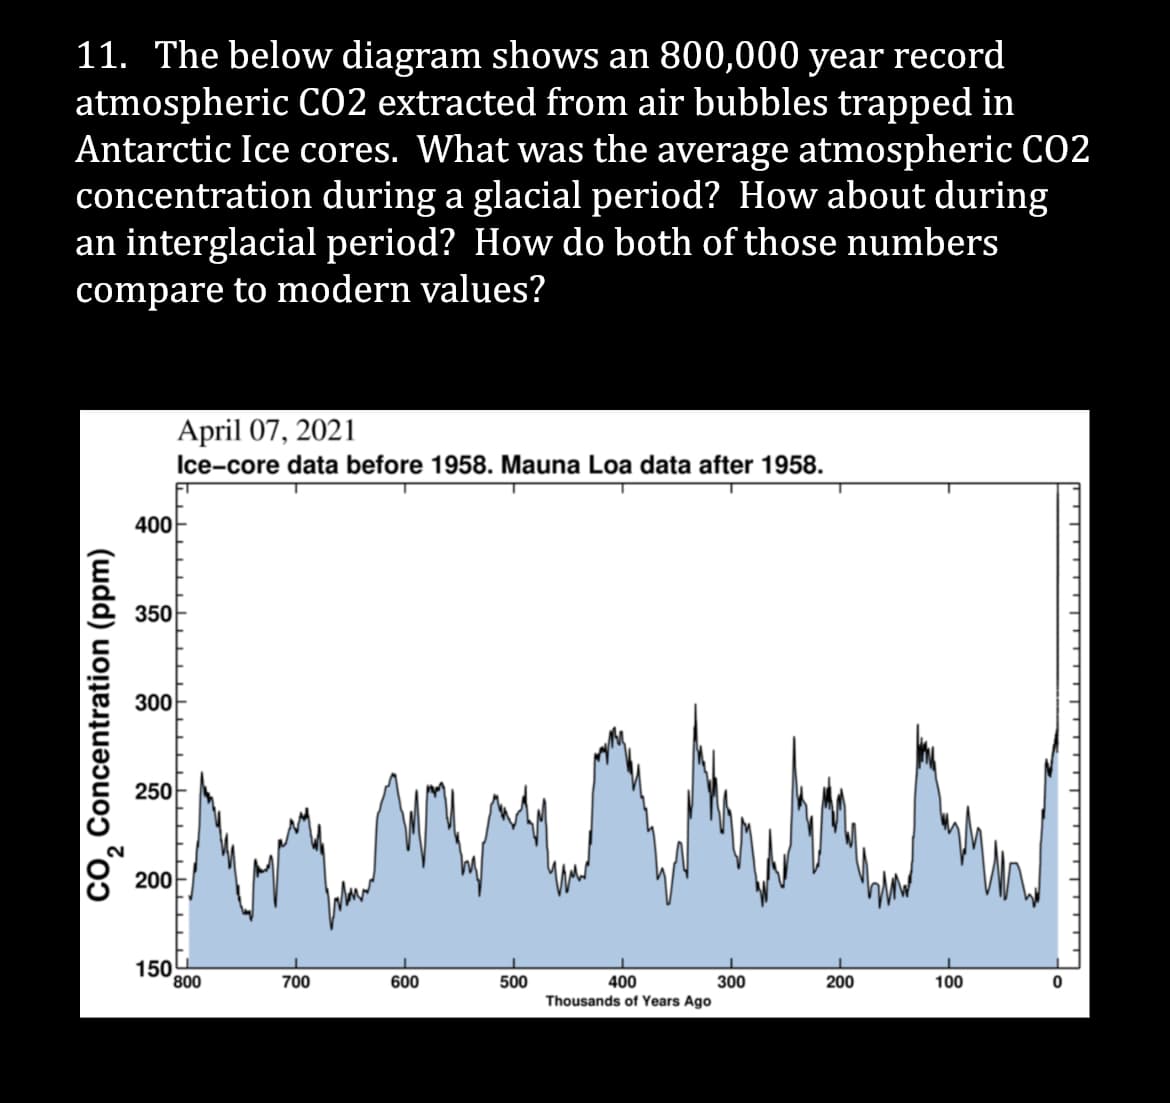 11. The below diagram shows an 800,000 year record
atmospheric CO2 extracted from air bubbles trapped in
Antarctic Ice cores. What was the average atmospheric CO2
concentration during a glacial period? How about during
an interglacial period? How do both of those numbers
compare to modern values?
April 07, 2021
Ice-core data before 1958. Mauna Loa data after 1958.
400
350
300
250
200
150
500
400
300
200
Thousands of Years Ago
CO₂ Concentration (ppm)
800
700
600
1
100
0